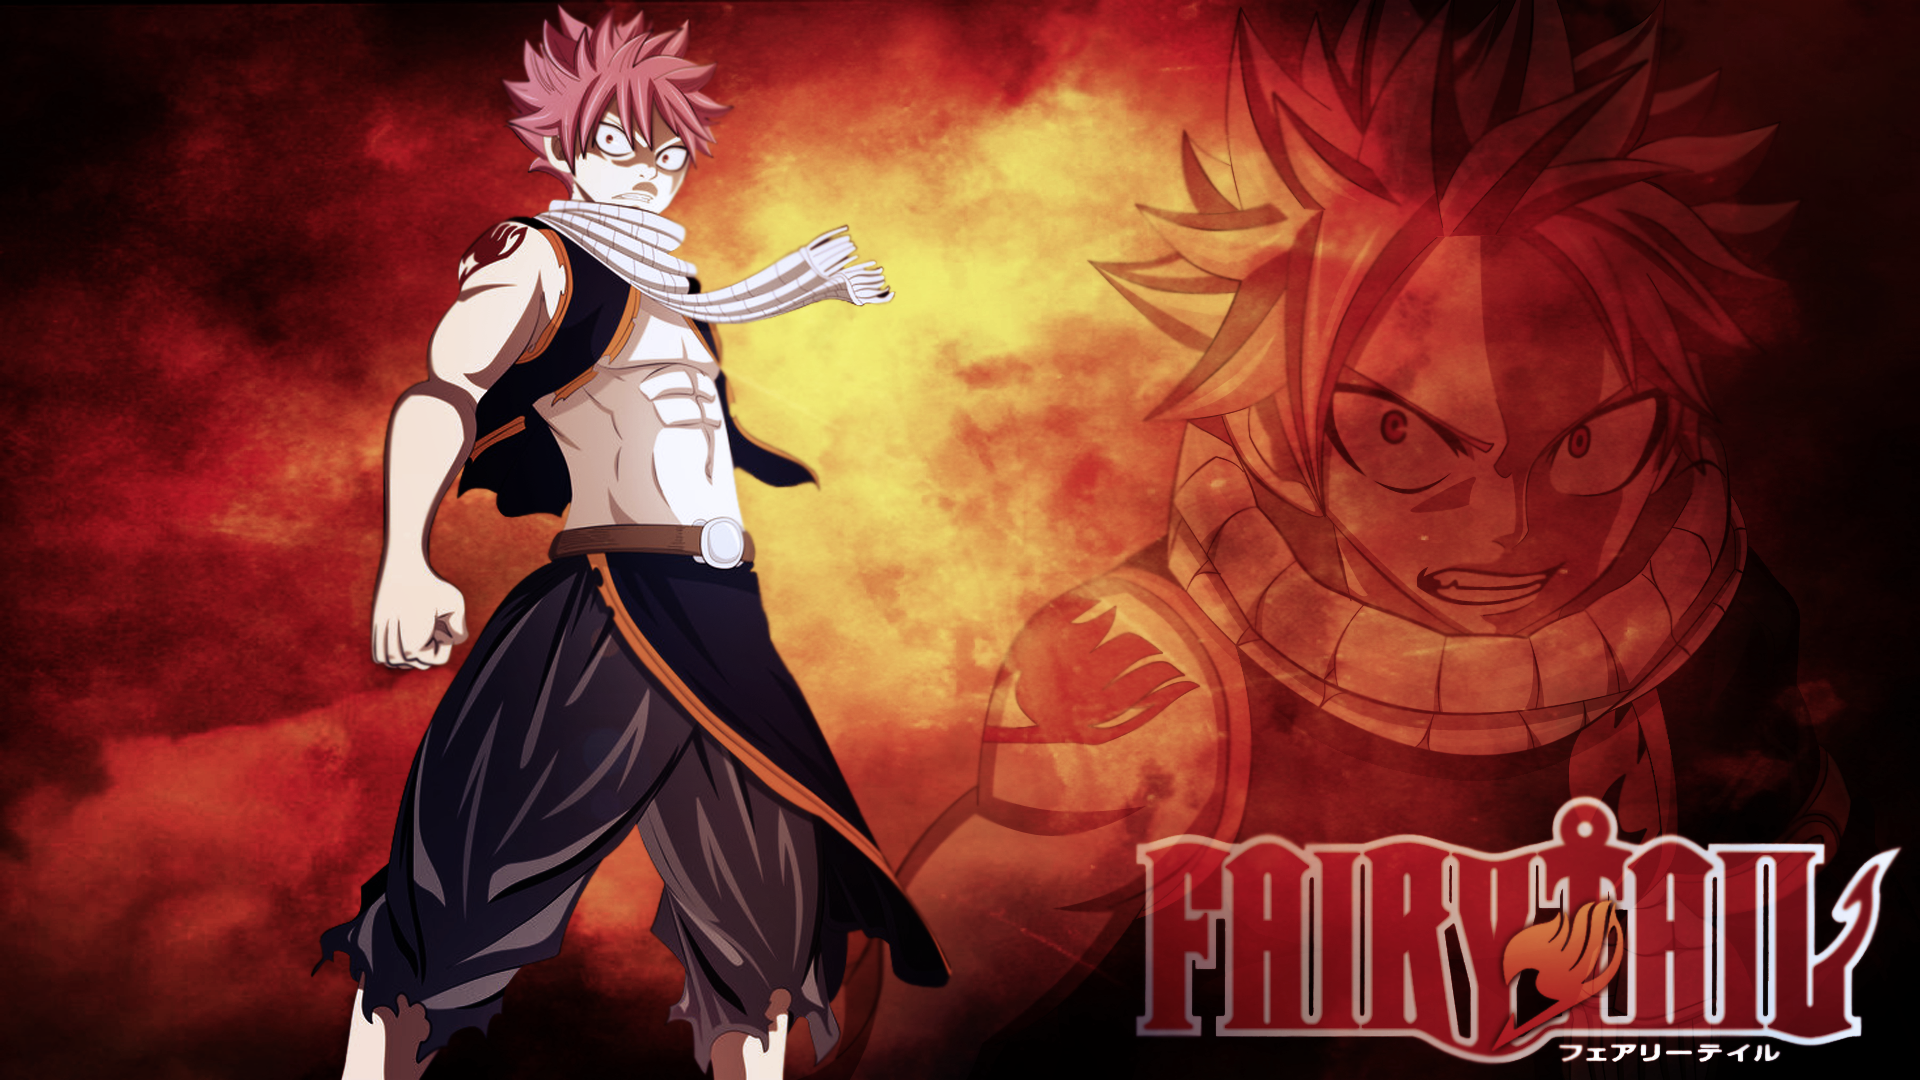 Fairy Tail Wallpaper Background HD Cool